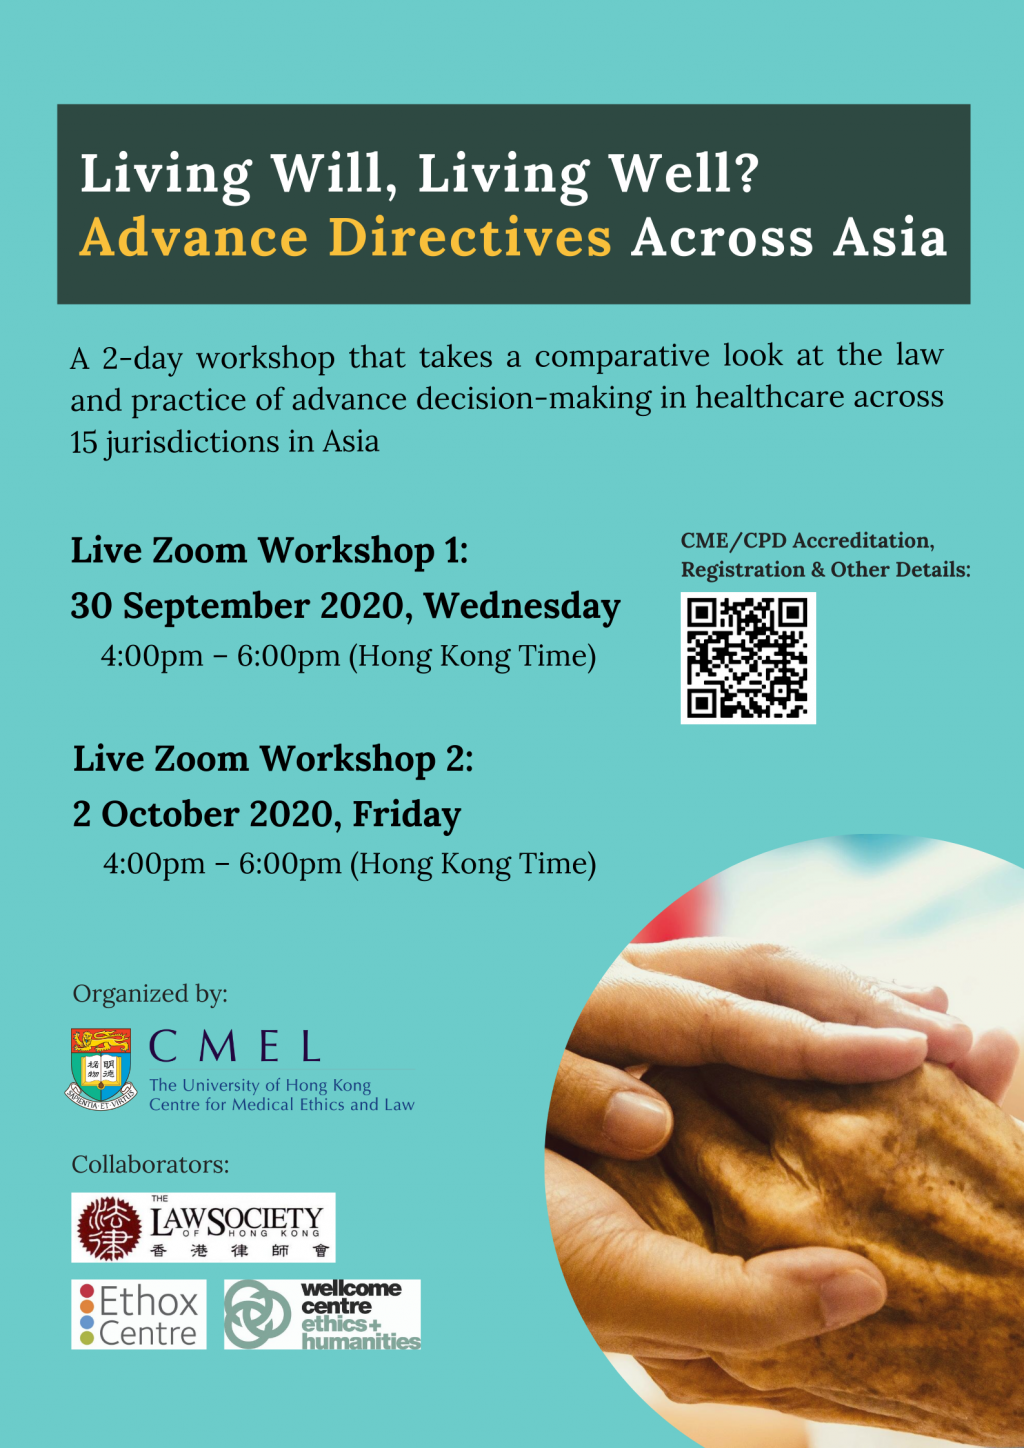 Living Will, Living Well? Advance Directives Across Asia Workhop 1